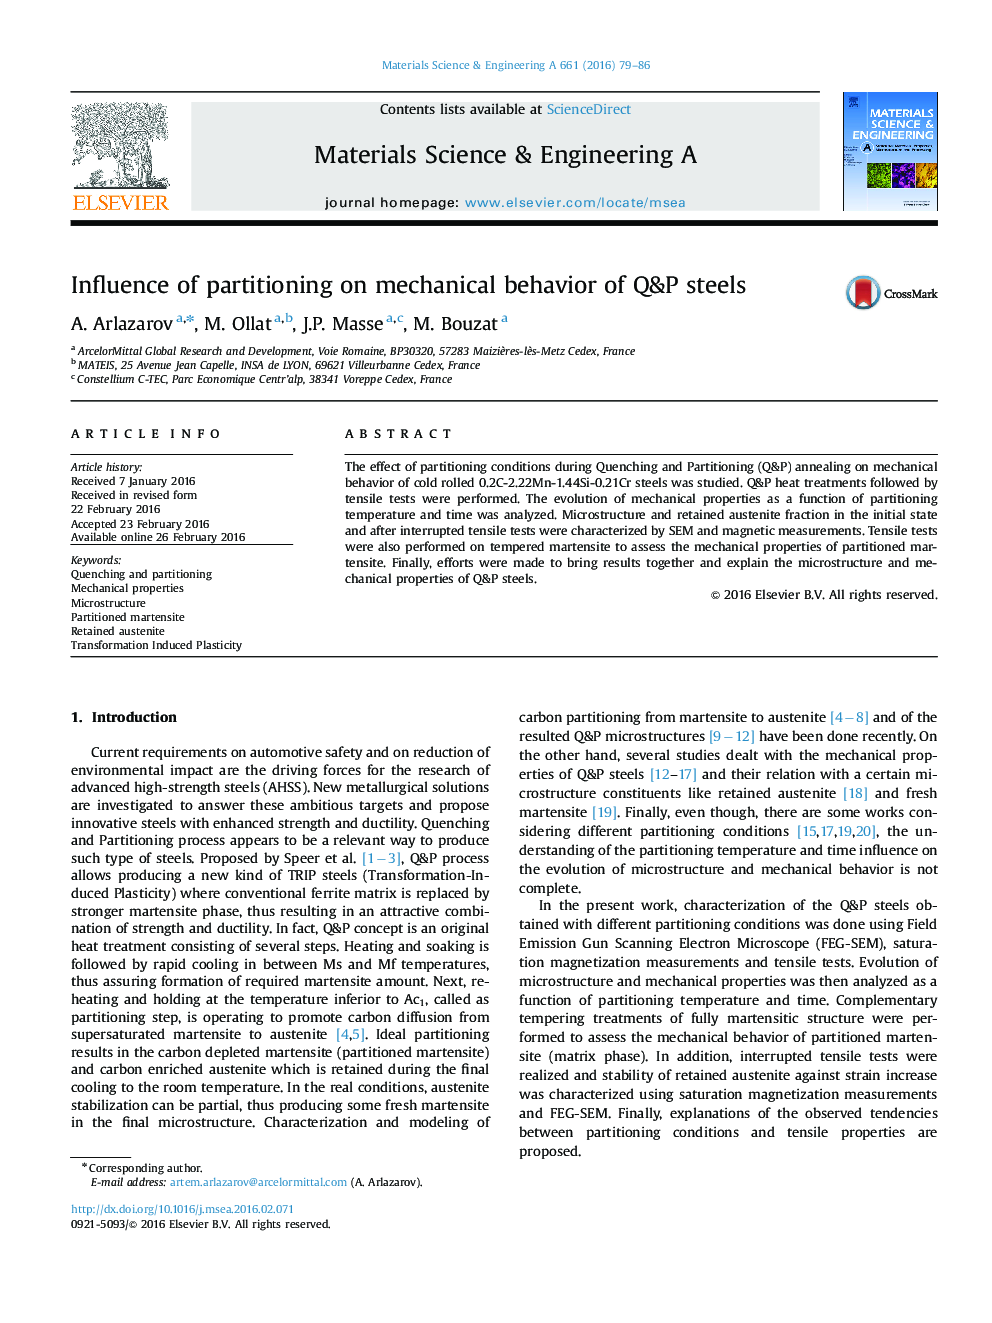 Influence of partitioning on mechanical behavior of Q&P steels